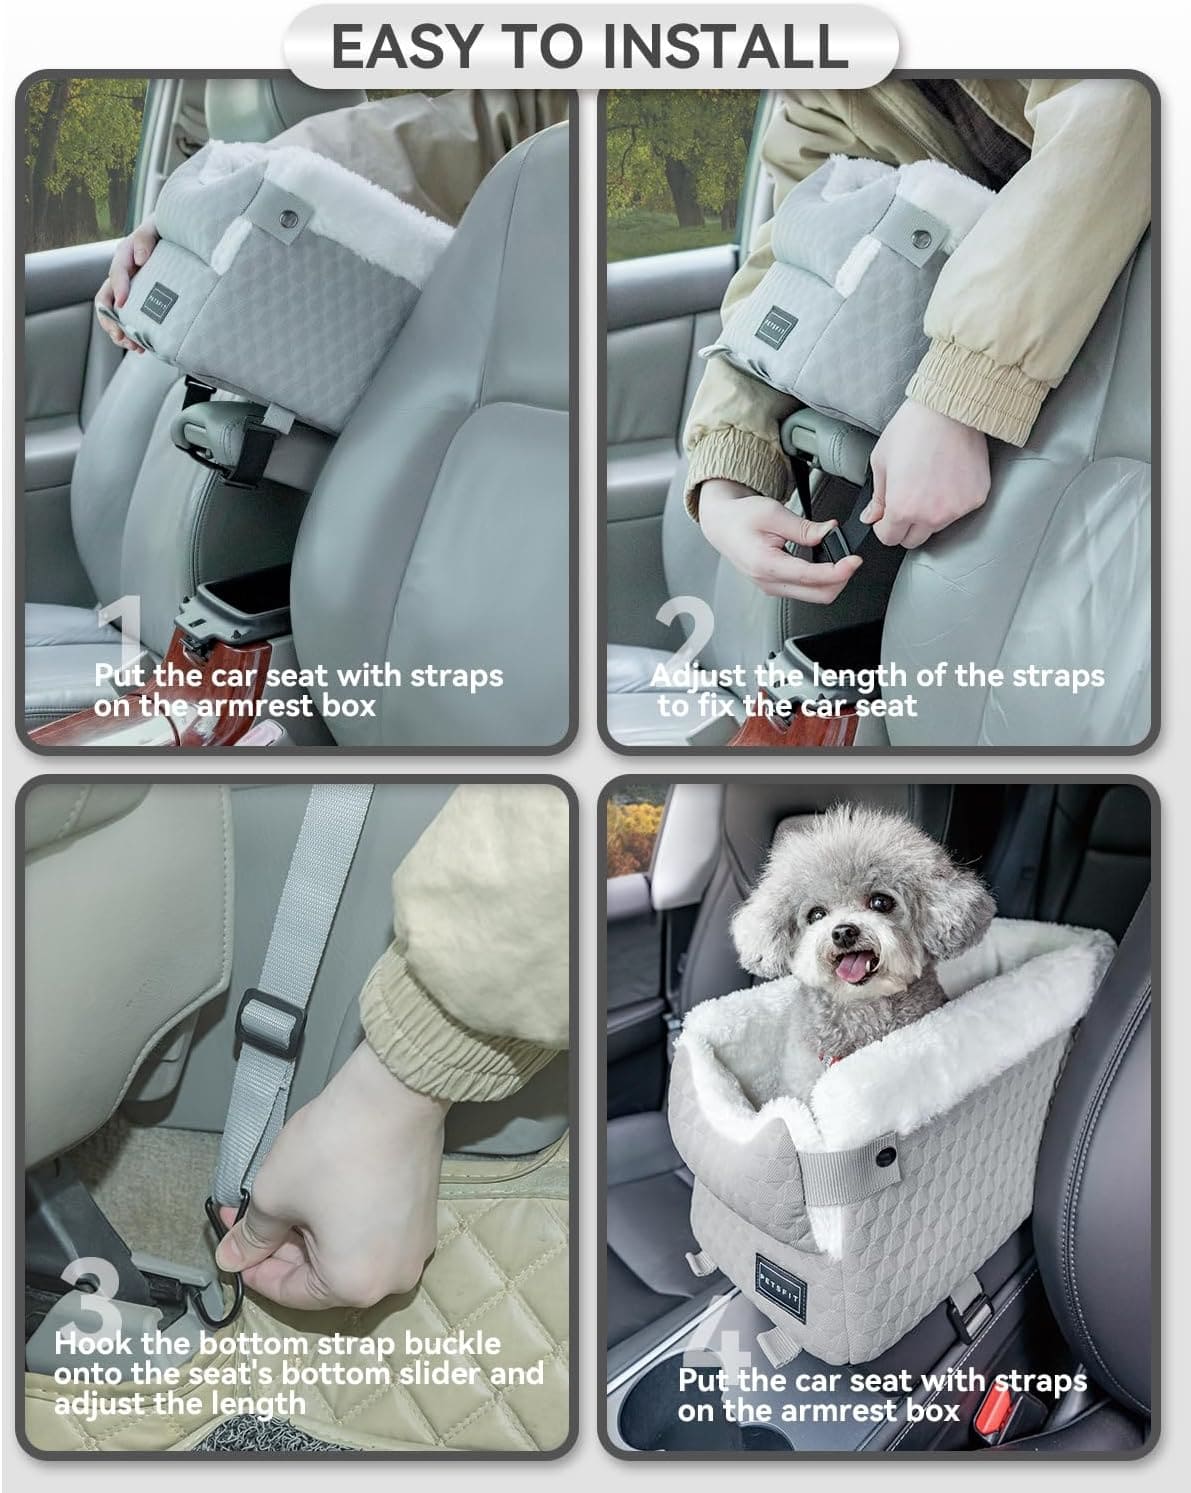 PETSFIT Dog Car Seats for Small Dogs with Safe Protection Hooks, Small Dog Car Seat with Upgraded Safety Tethers, Washable Cushion, Center Console Dog Car Seat Up to 12 Lbs